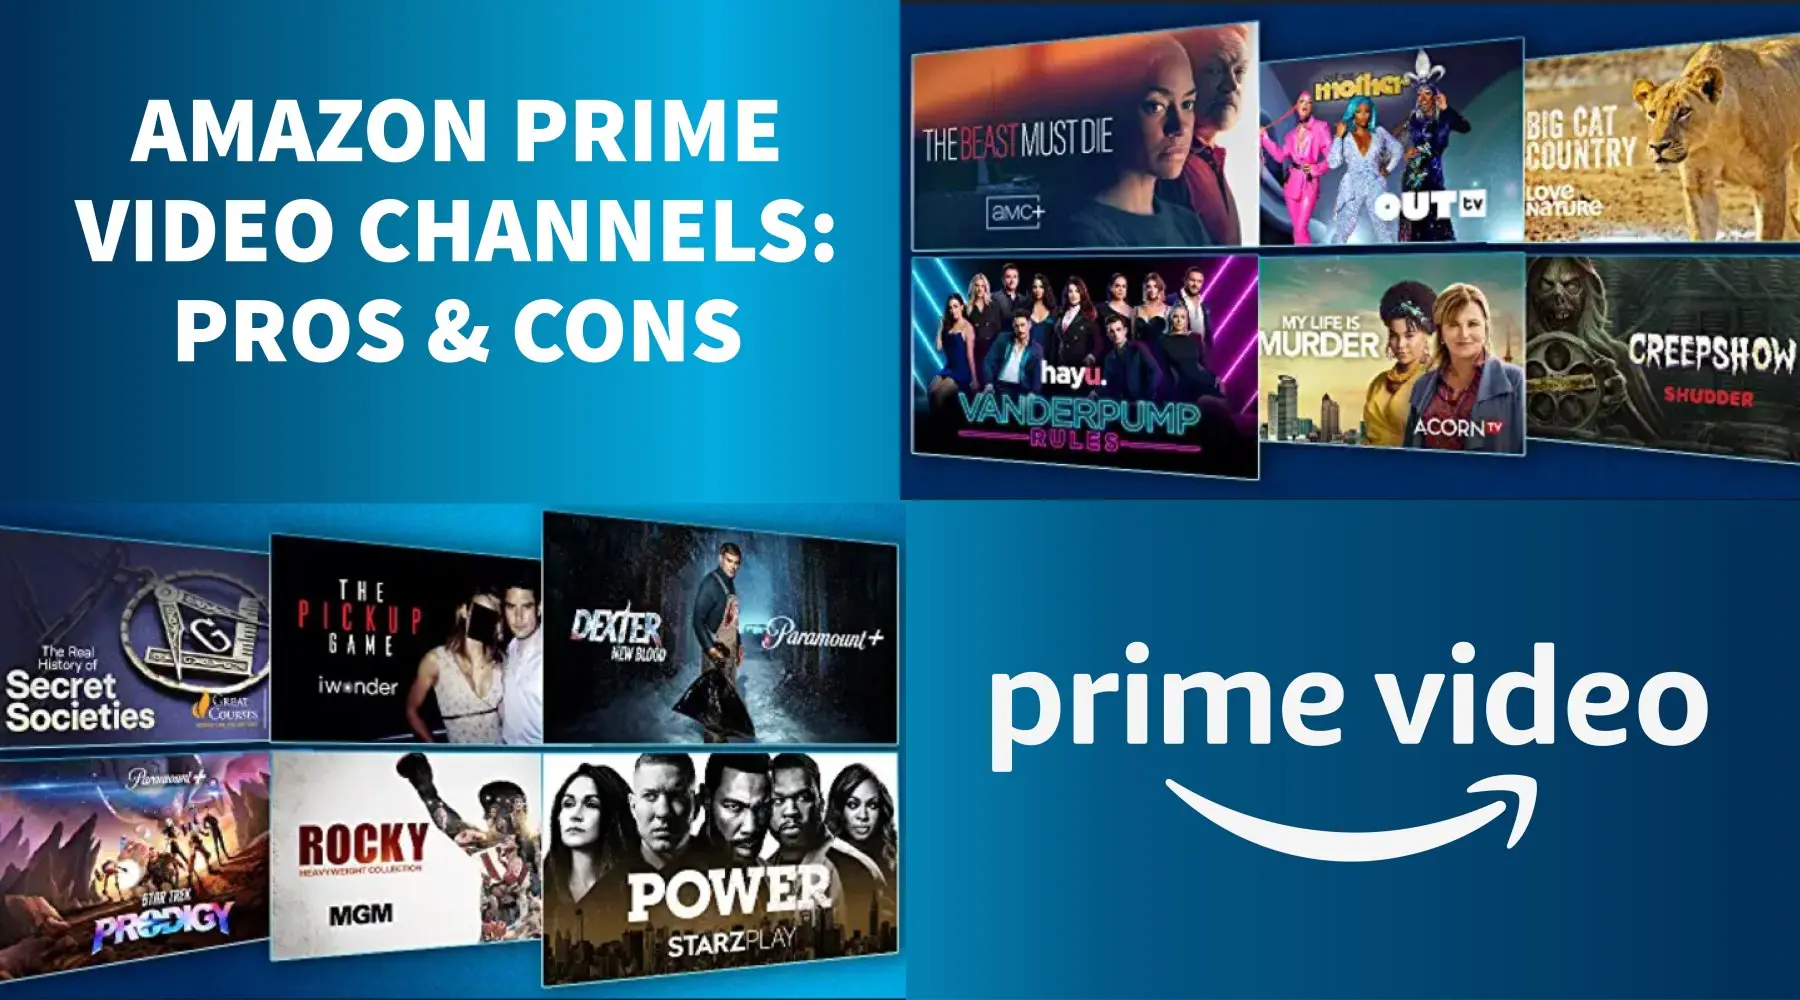 Prime Video Channels delivers 6 new streaming apps to Australia